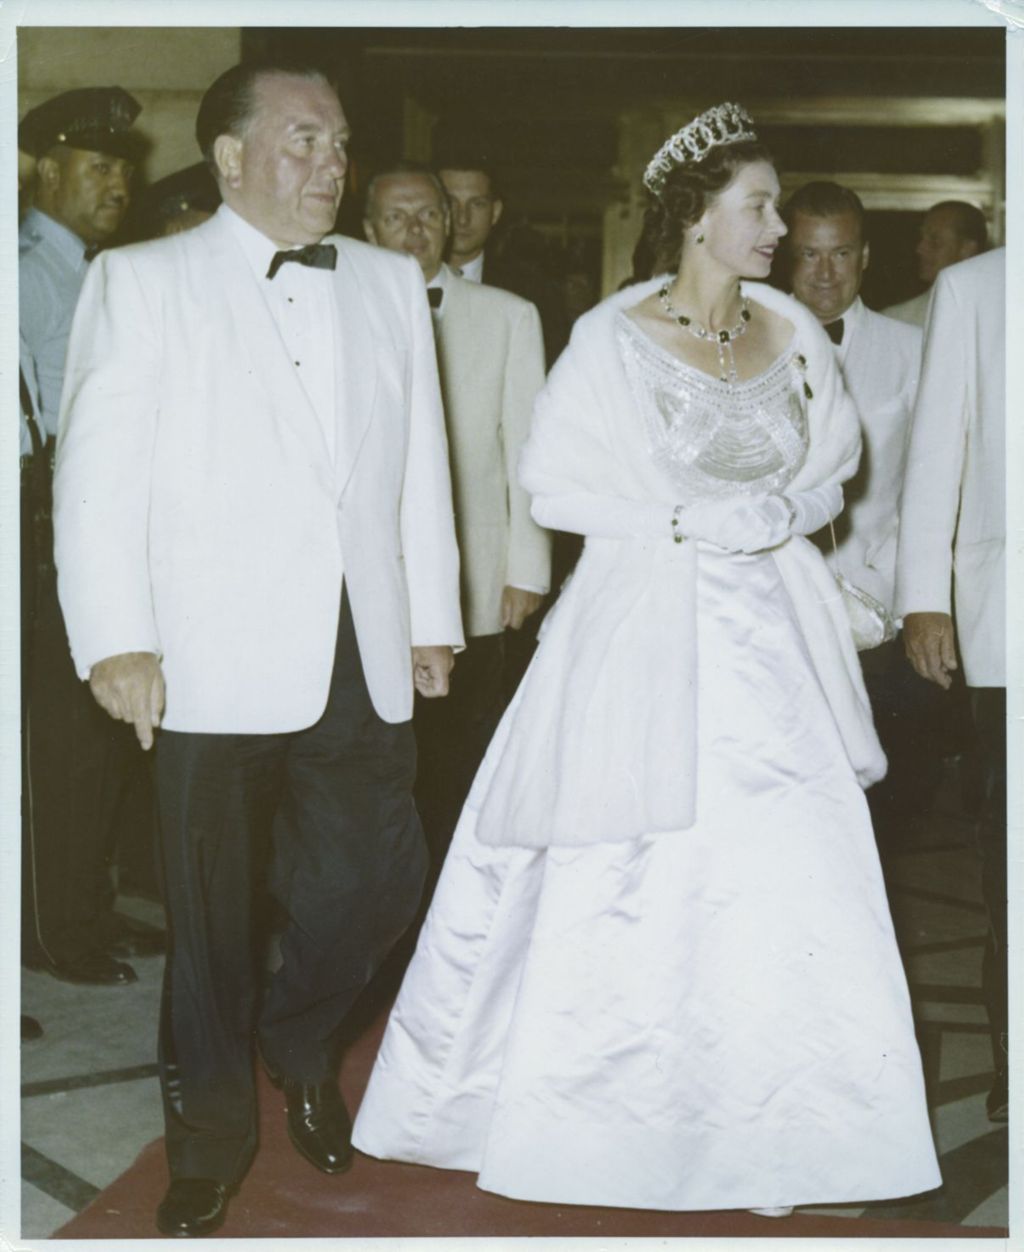 Richard J. Daley and Queen Elizabeth II at an evening banquet